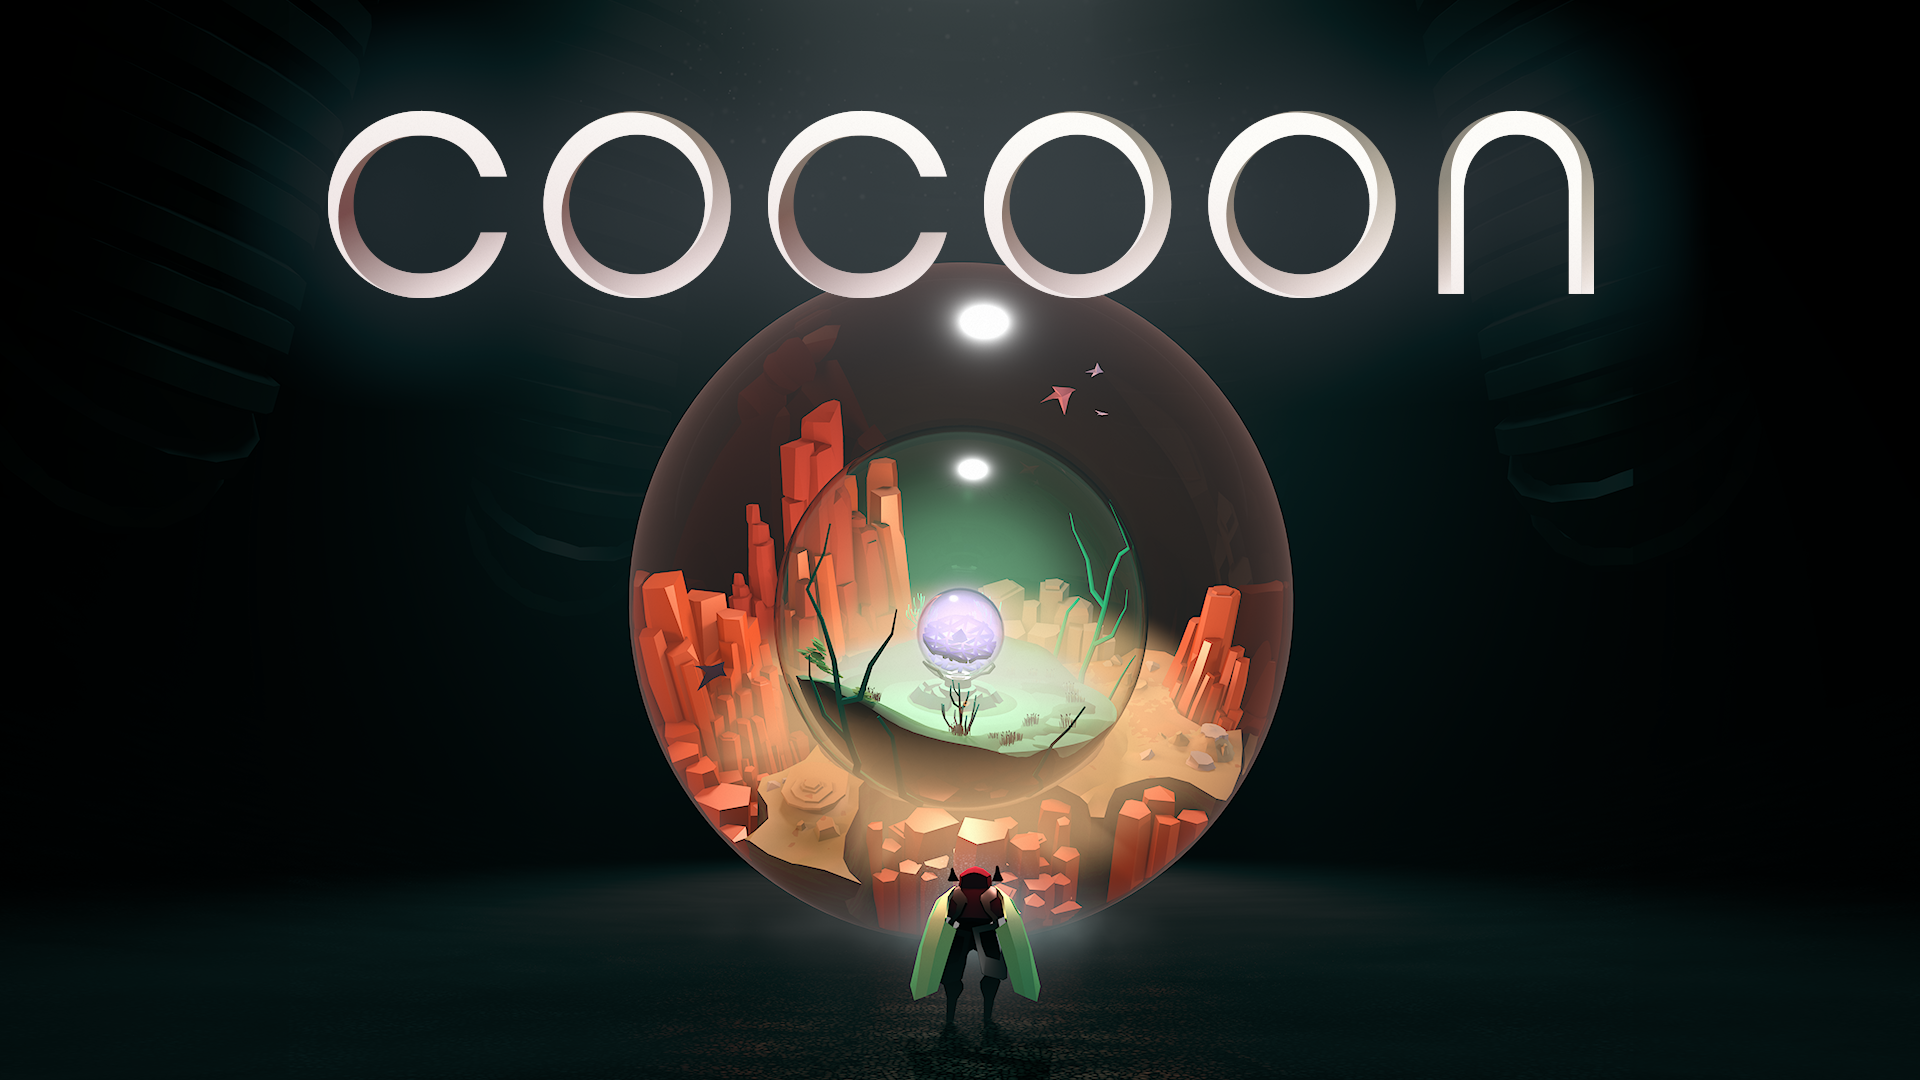 Promo photo for Cocoon featuering logo, and strange insect creature in front of a giant glass ball that seems to contain a world which in turn contains a glass ball with a world.